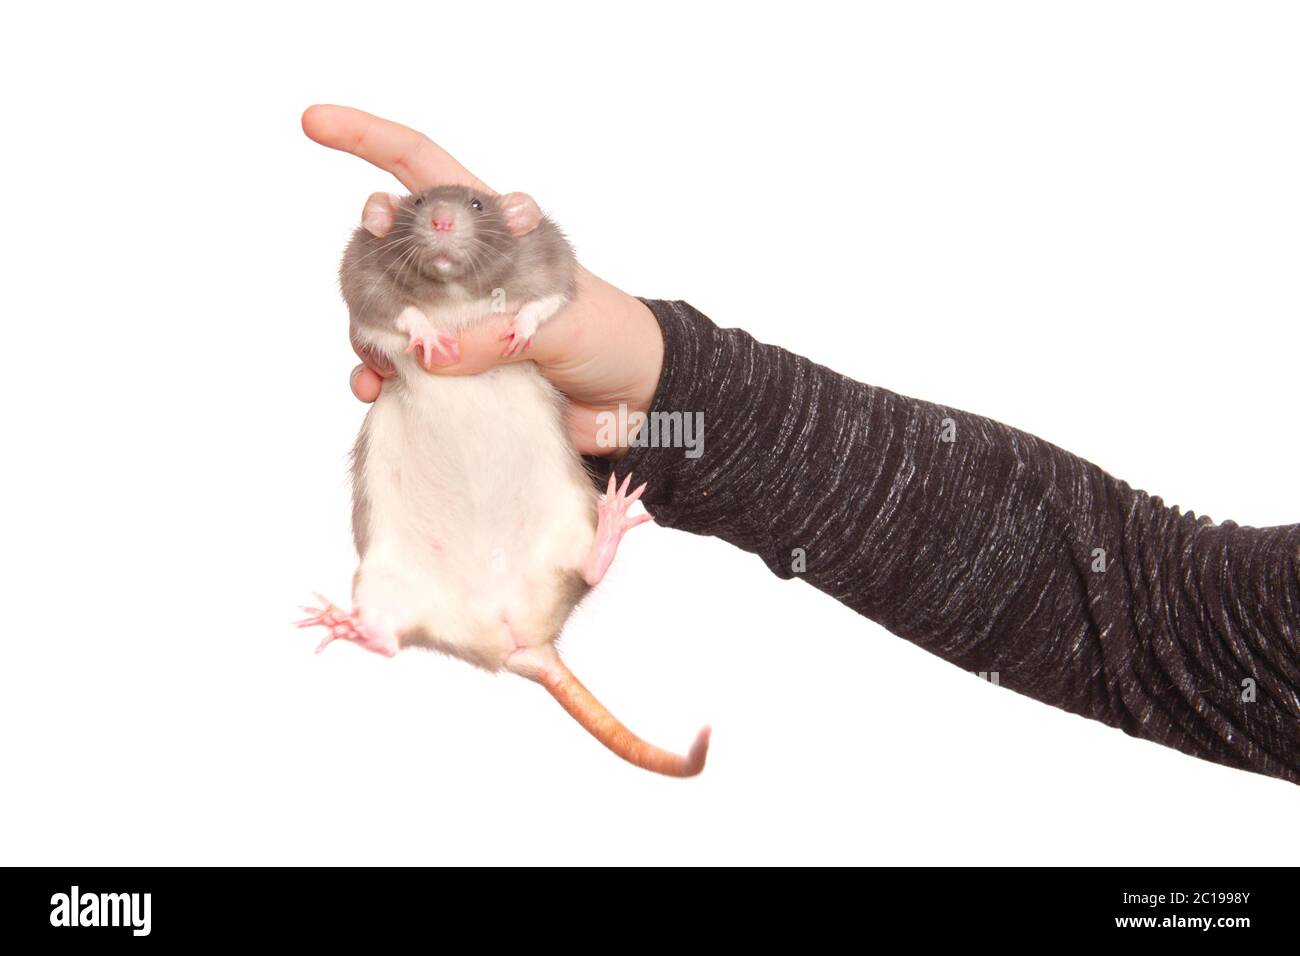 Hands of young woman with cute rat on white background Stock Photo ...